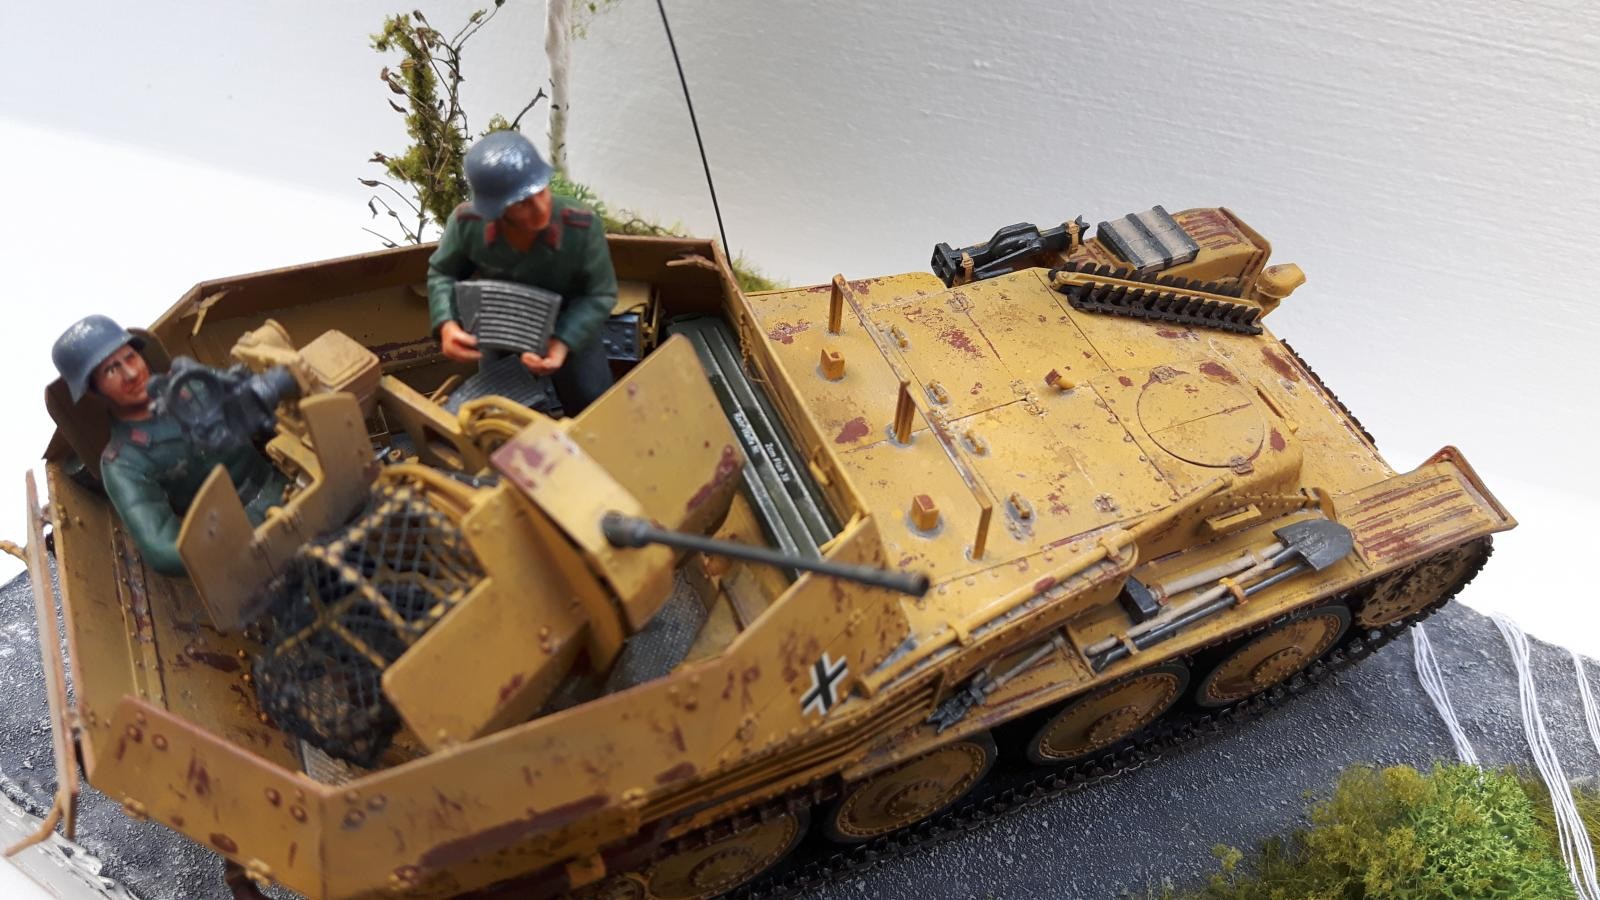 Hobby Boss German Mm Flak 38 Pz Kpfw 38 T In 1 35 With Diorama Imodeler